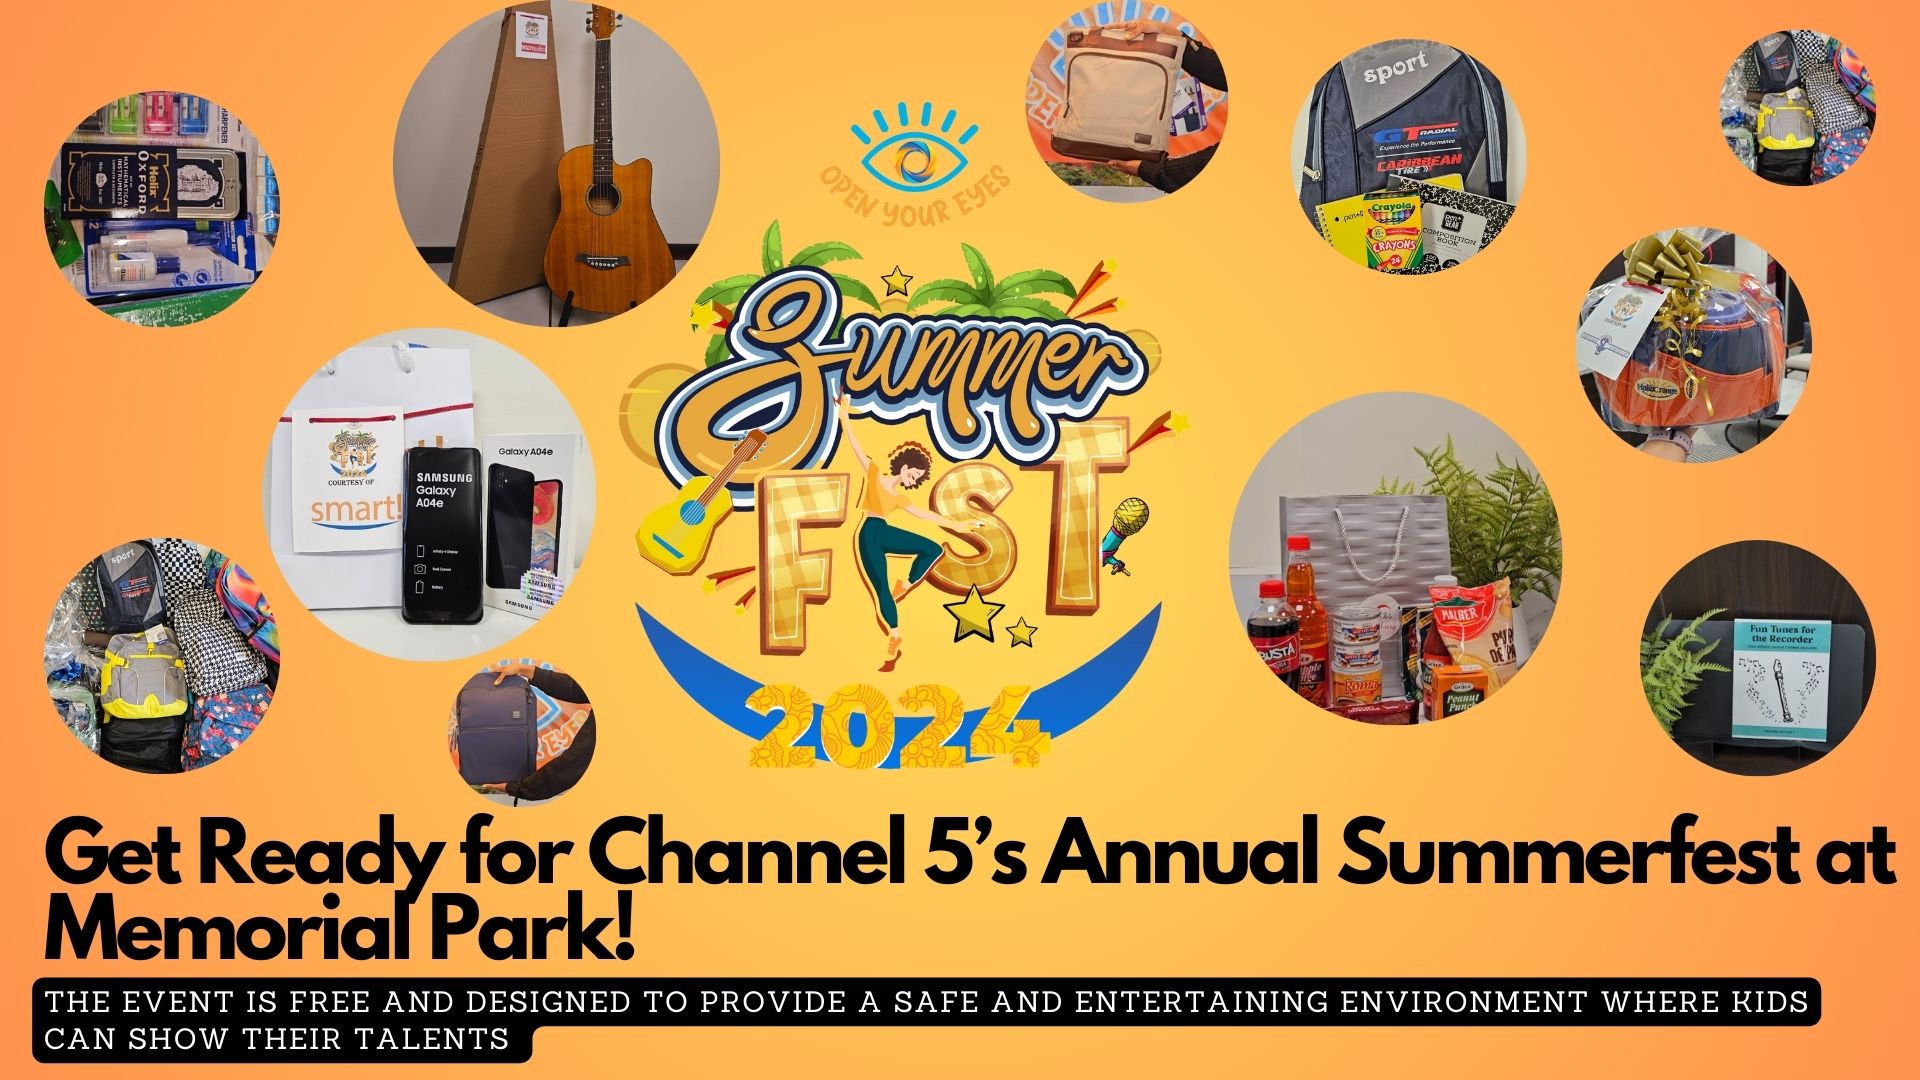 Get Ready for Channel 5’s Annual Summerfest at Memorial Park!